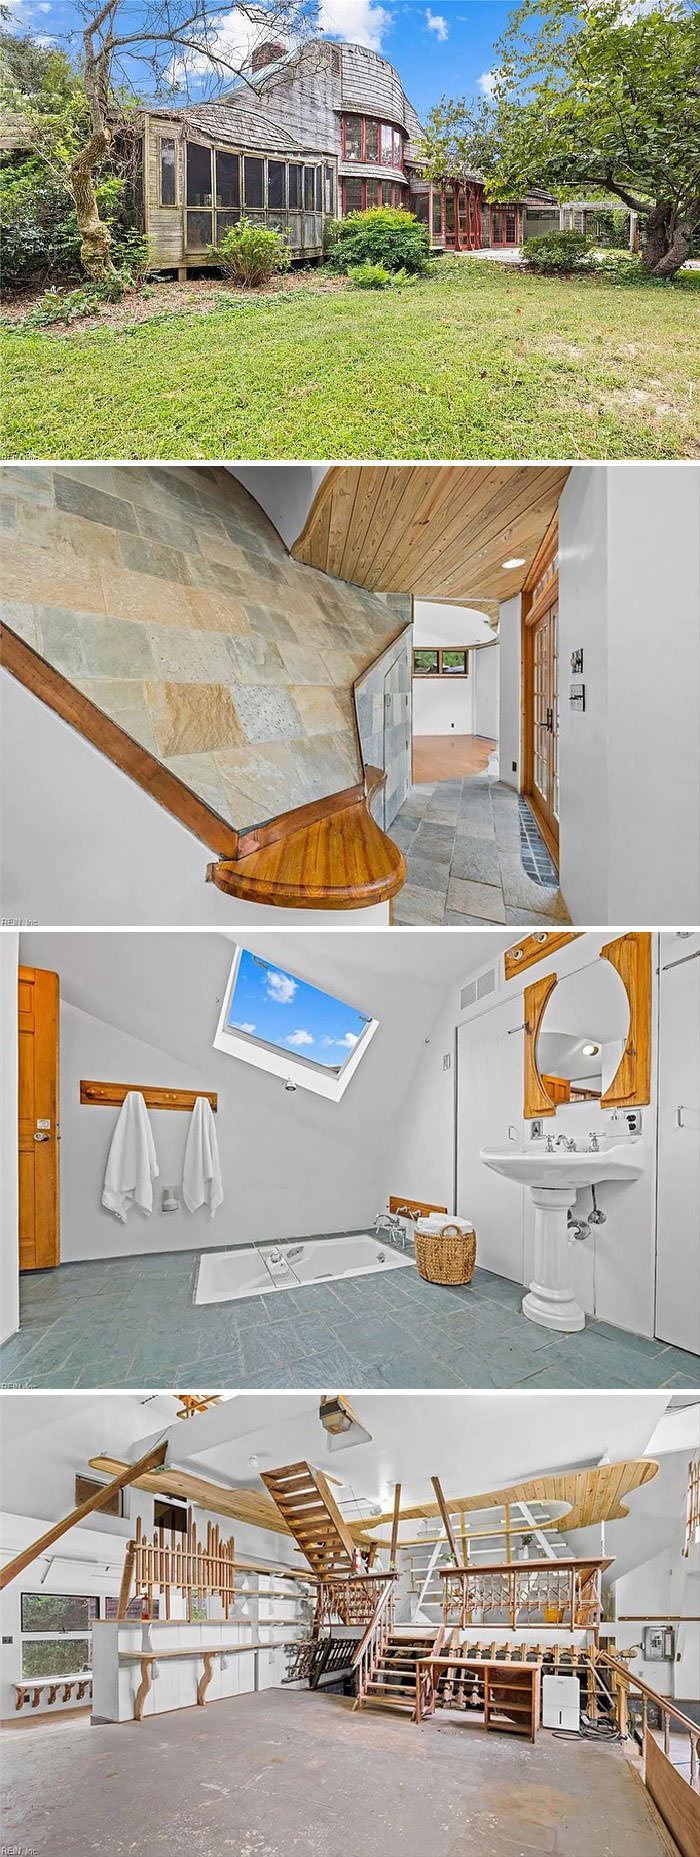 I am baffled by this house - the wavy wood has me super confused. Also, there's a death trap tub.